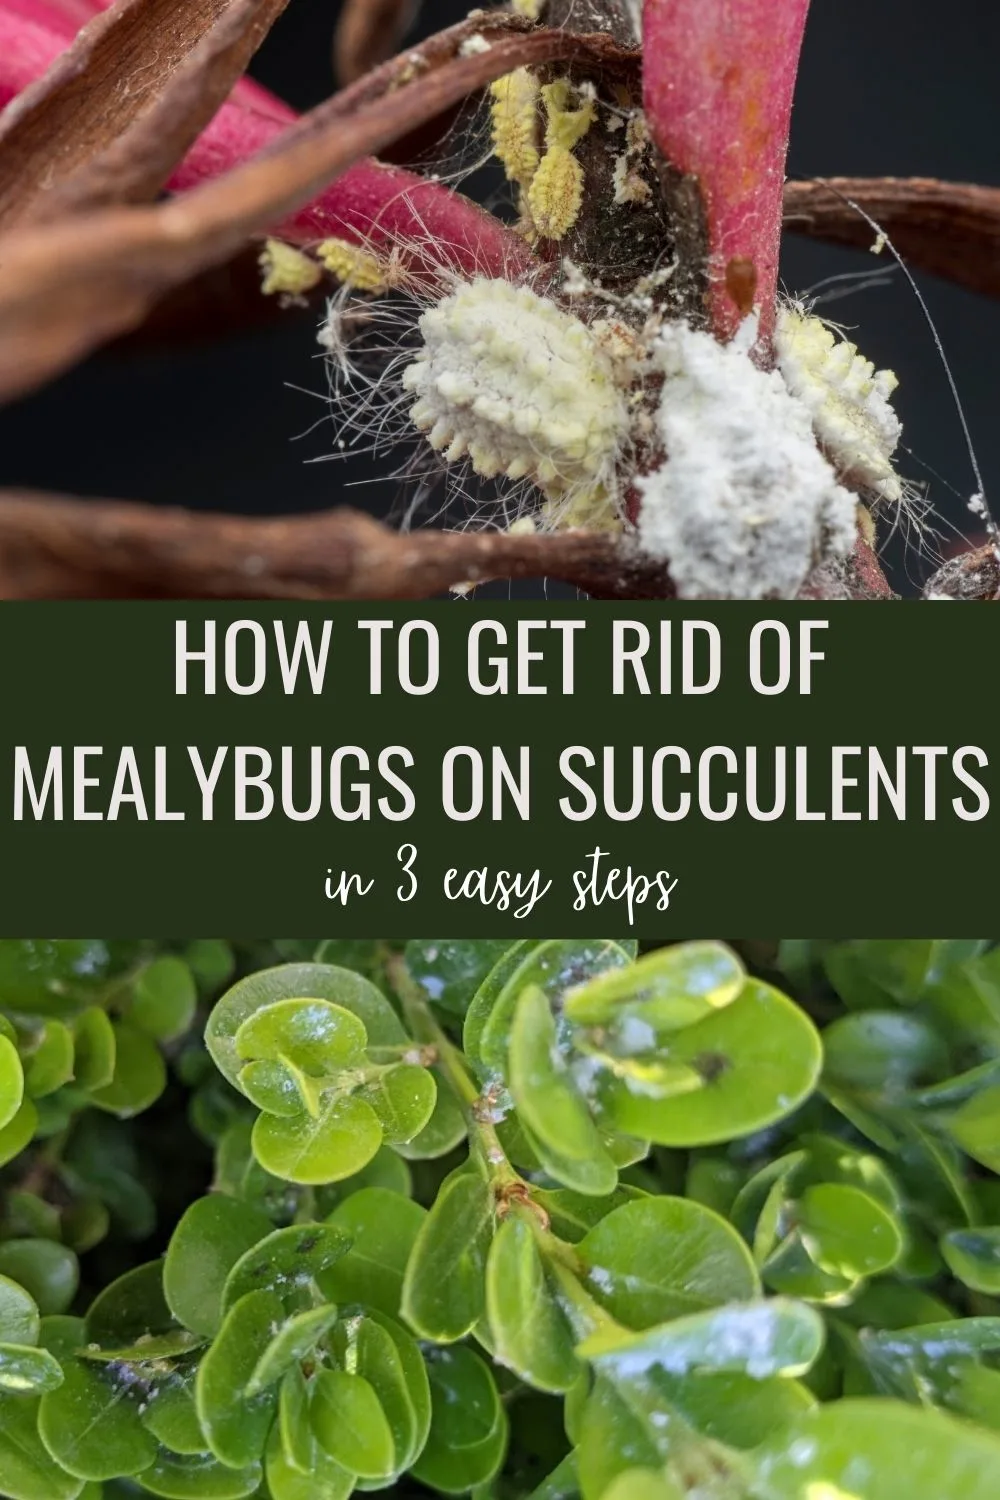 How to Get Rid of Mealybugs on Succulents in 3 Easy Steps.